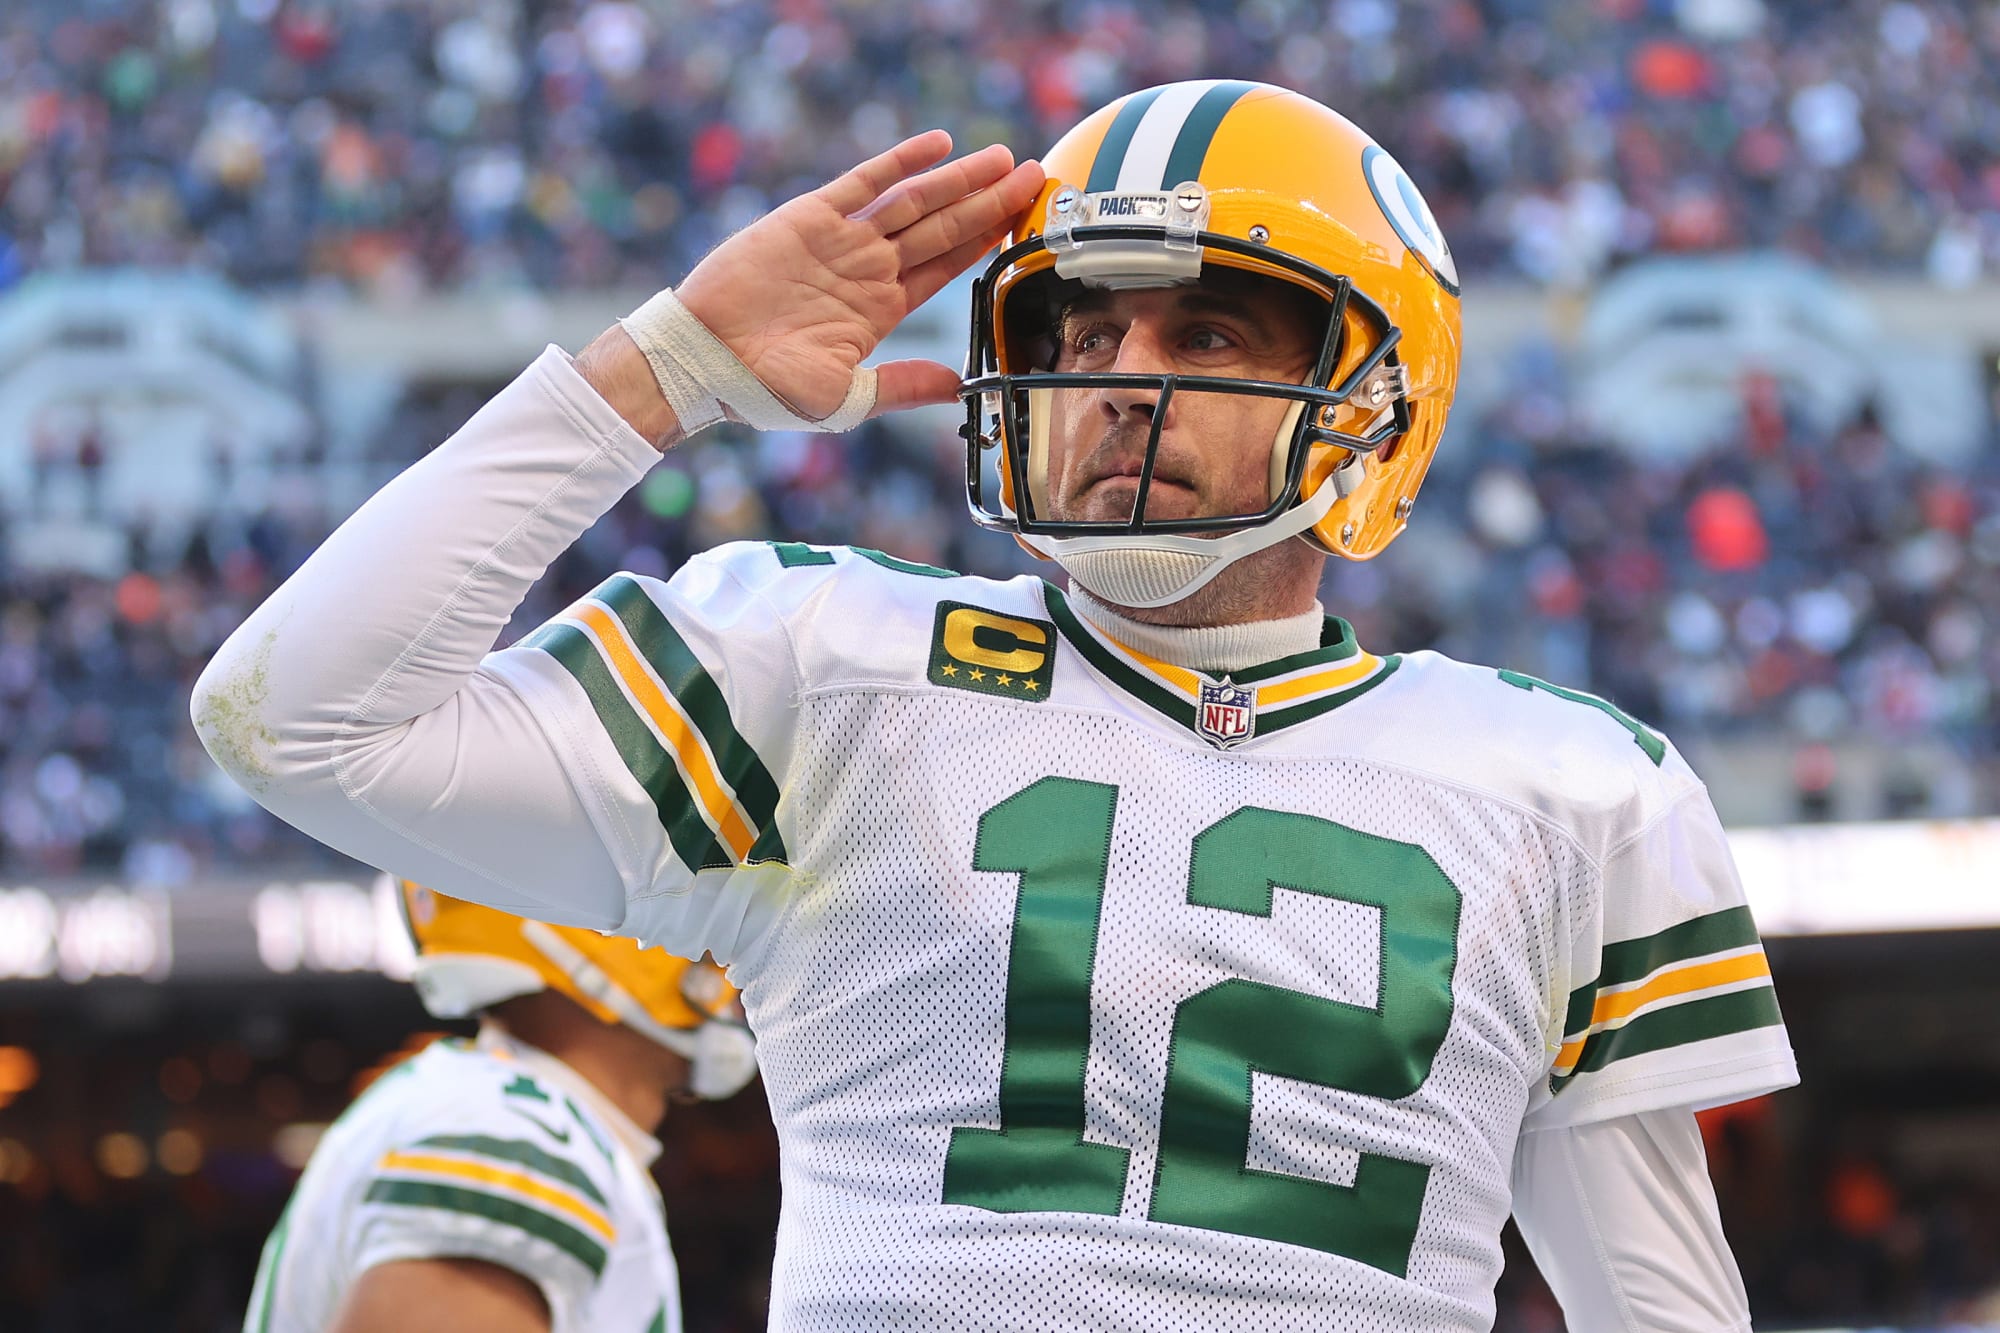 Chicago Bears: This could finally be the offseason Aaron Rodgers leaves the Packers